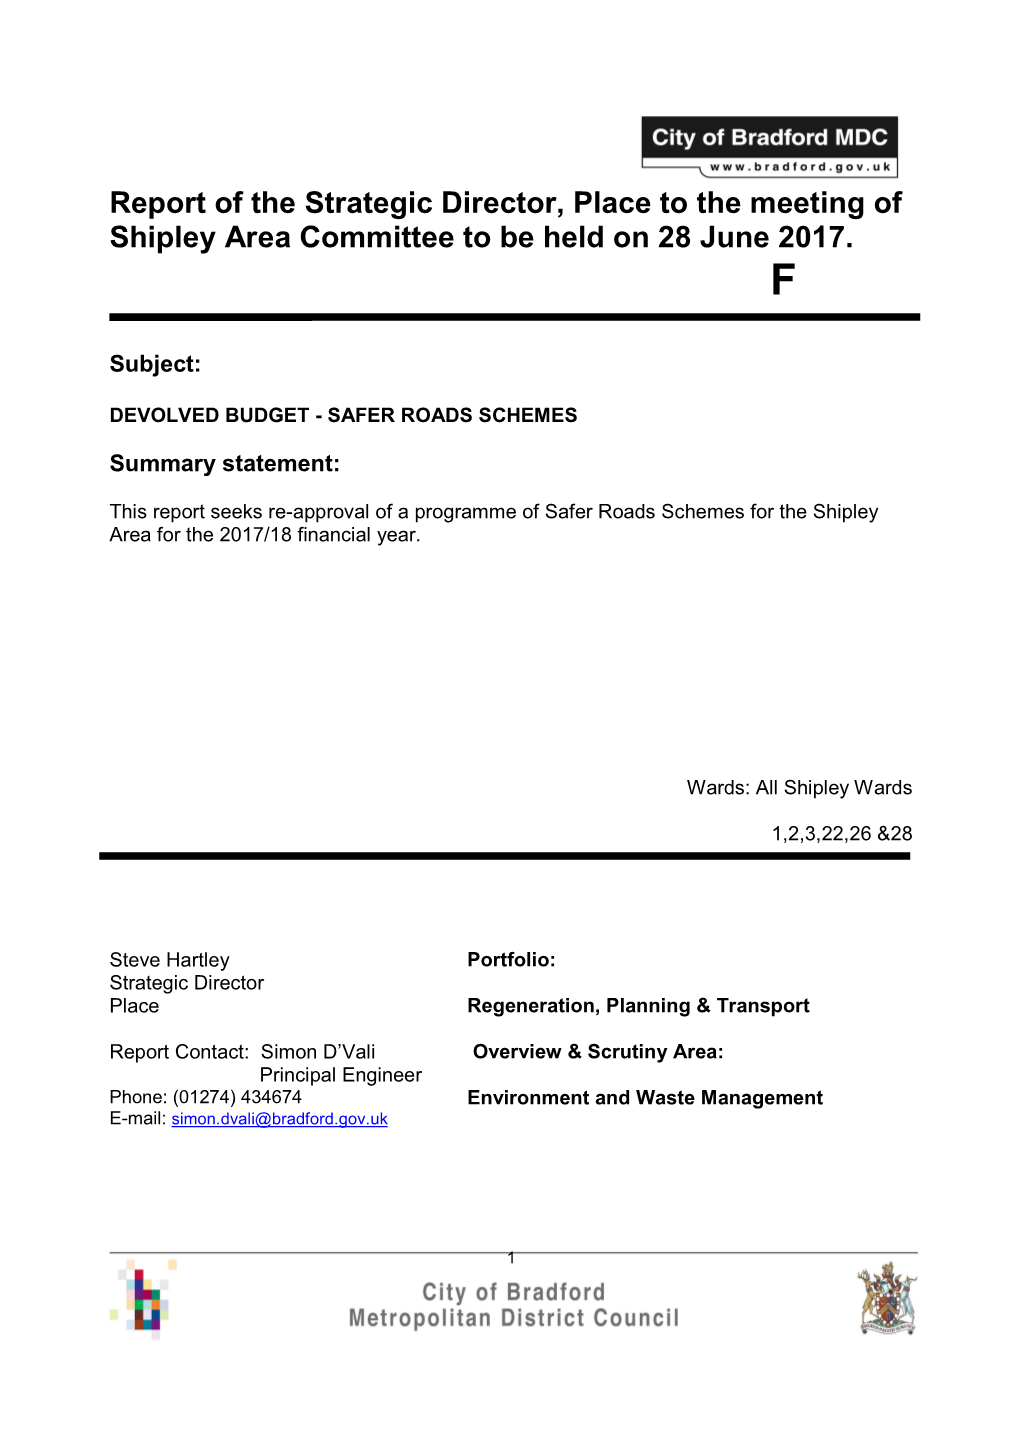 Report of the Strategic Director, Place to the Meeting of Shipley Area Committee to Be Held on 28 June 2017